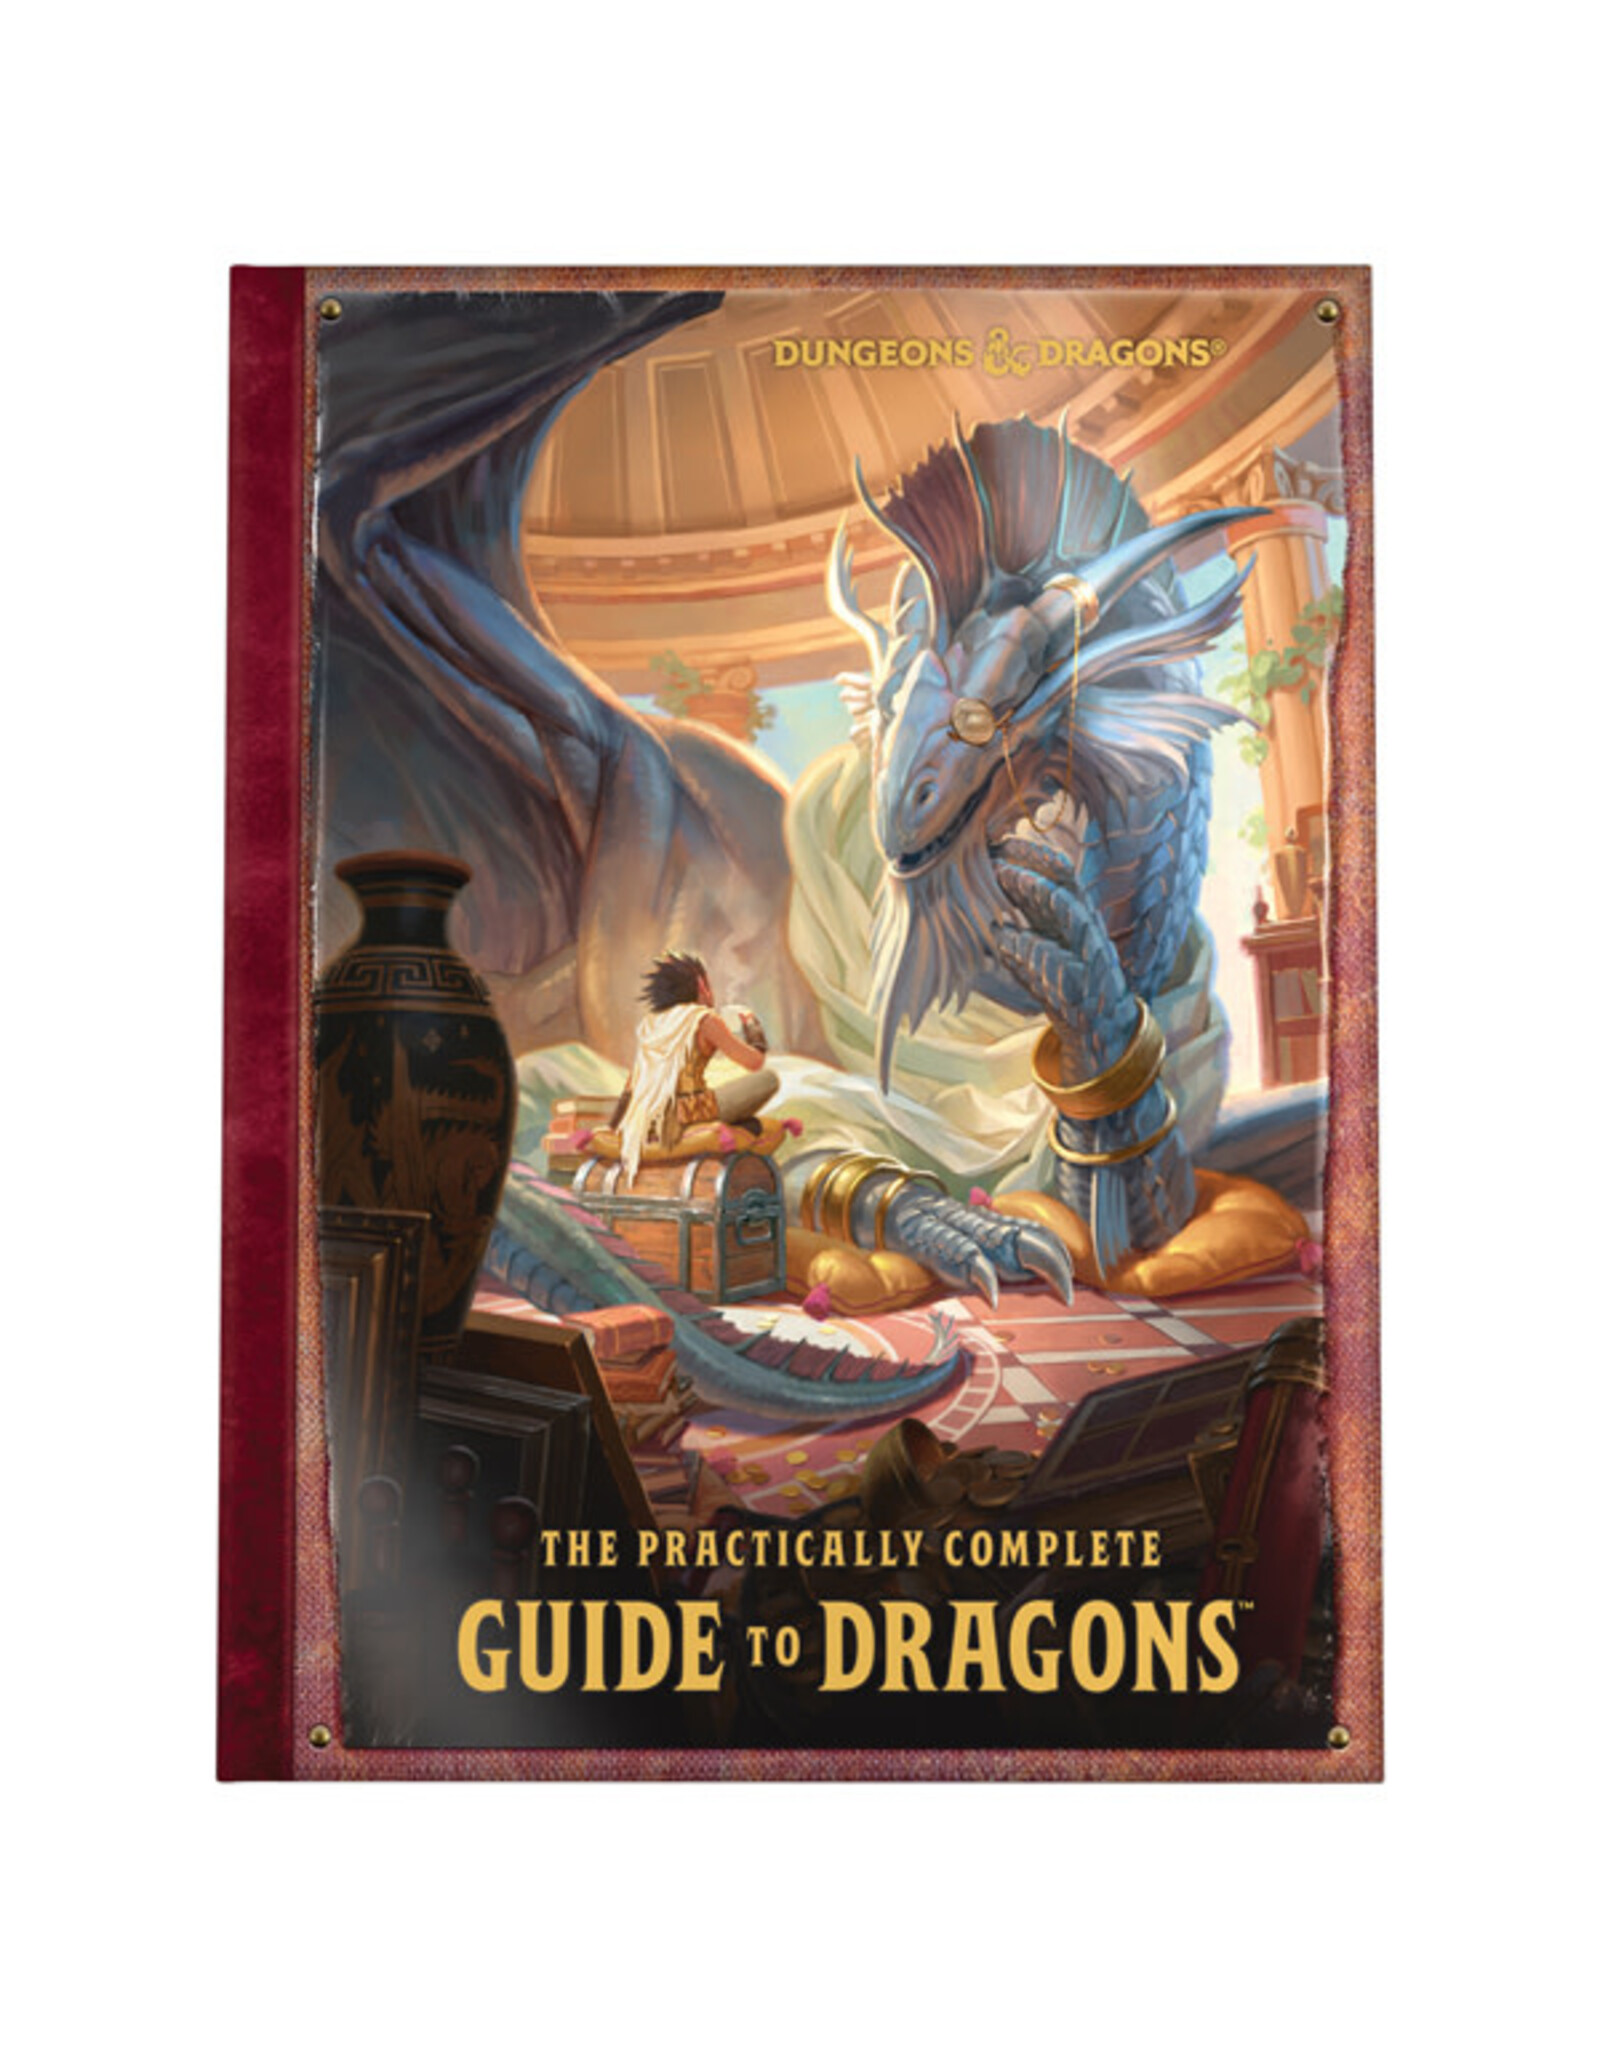 D&D Practically Complete Guide to Dungeons and Dragons